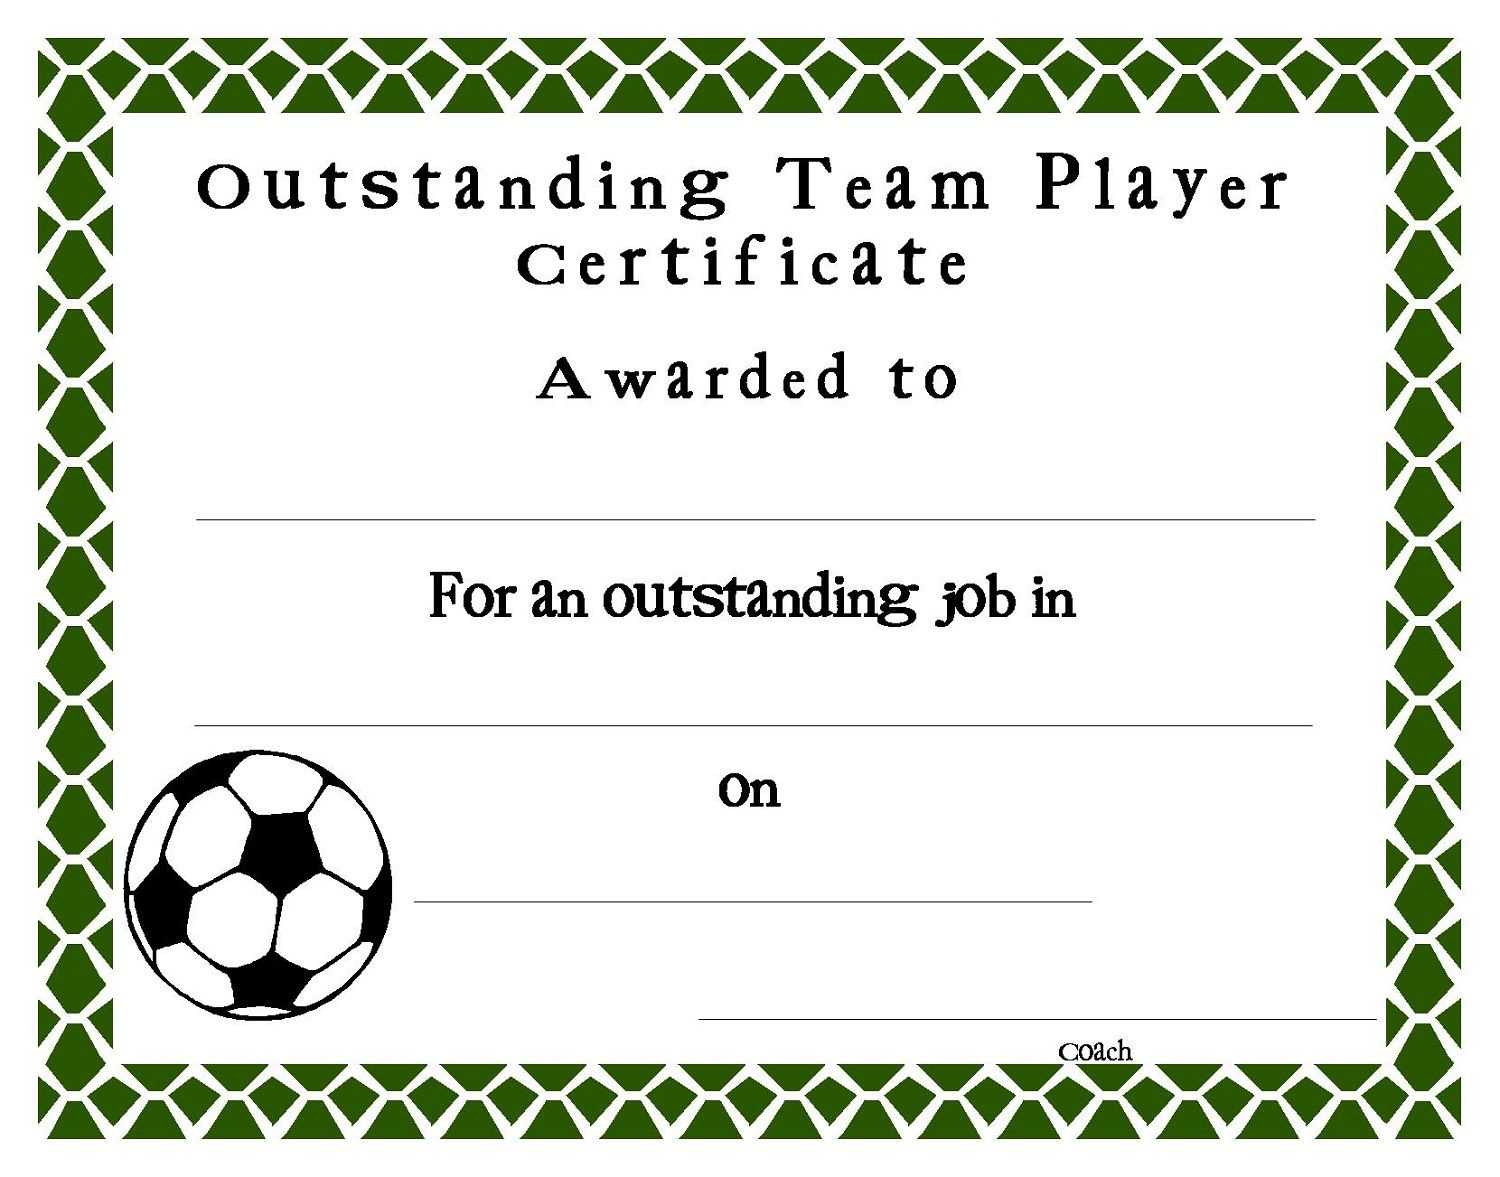 Soccer Certificate Templates Blank | K5 Worksheets Intended For Free Softball Certificate Templates